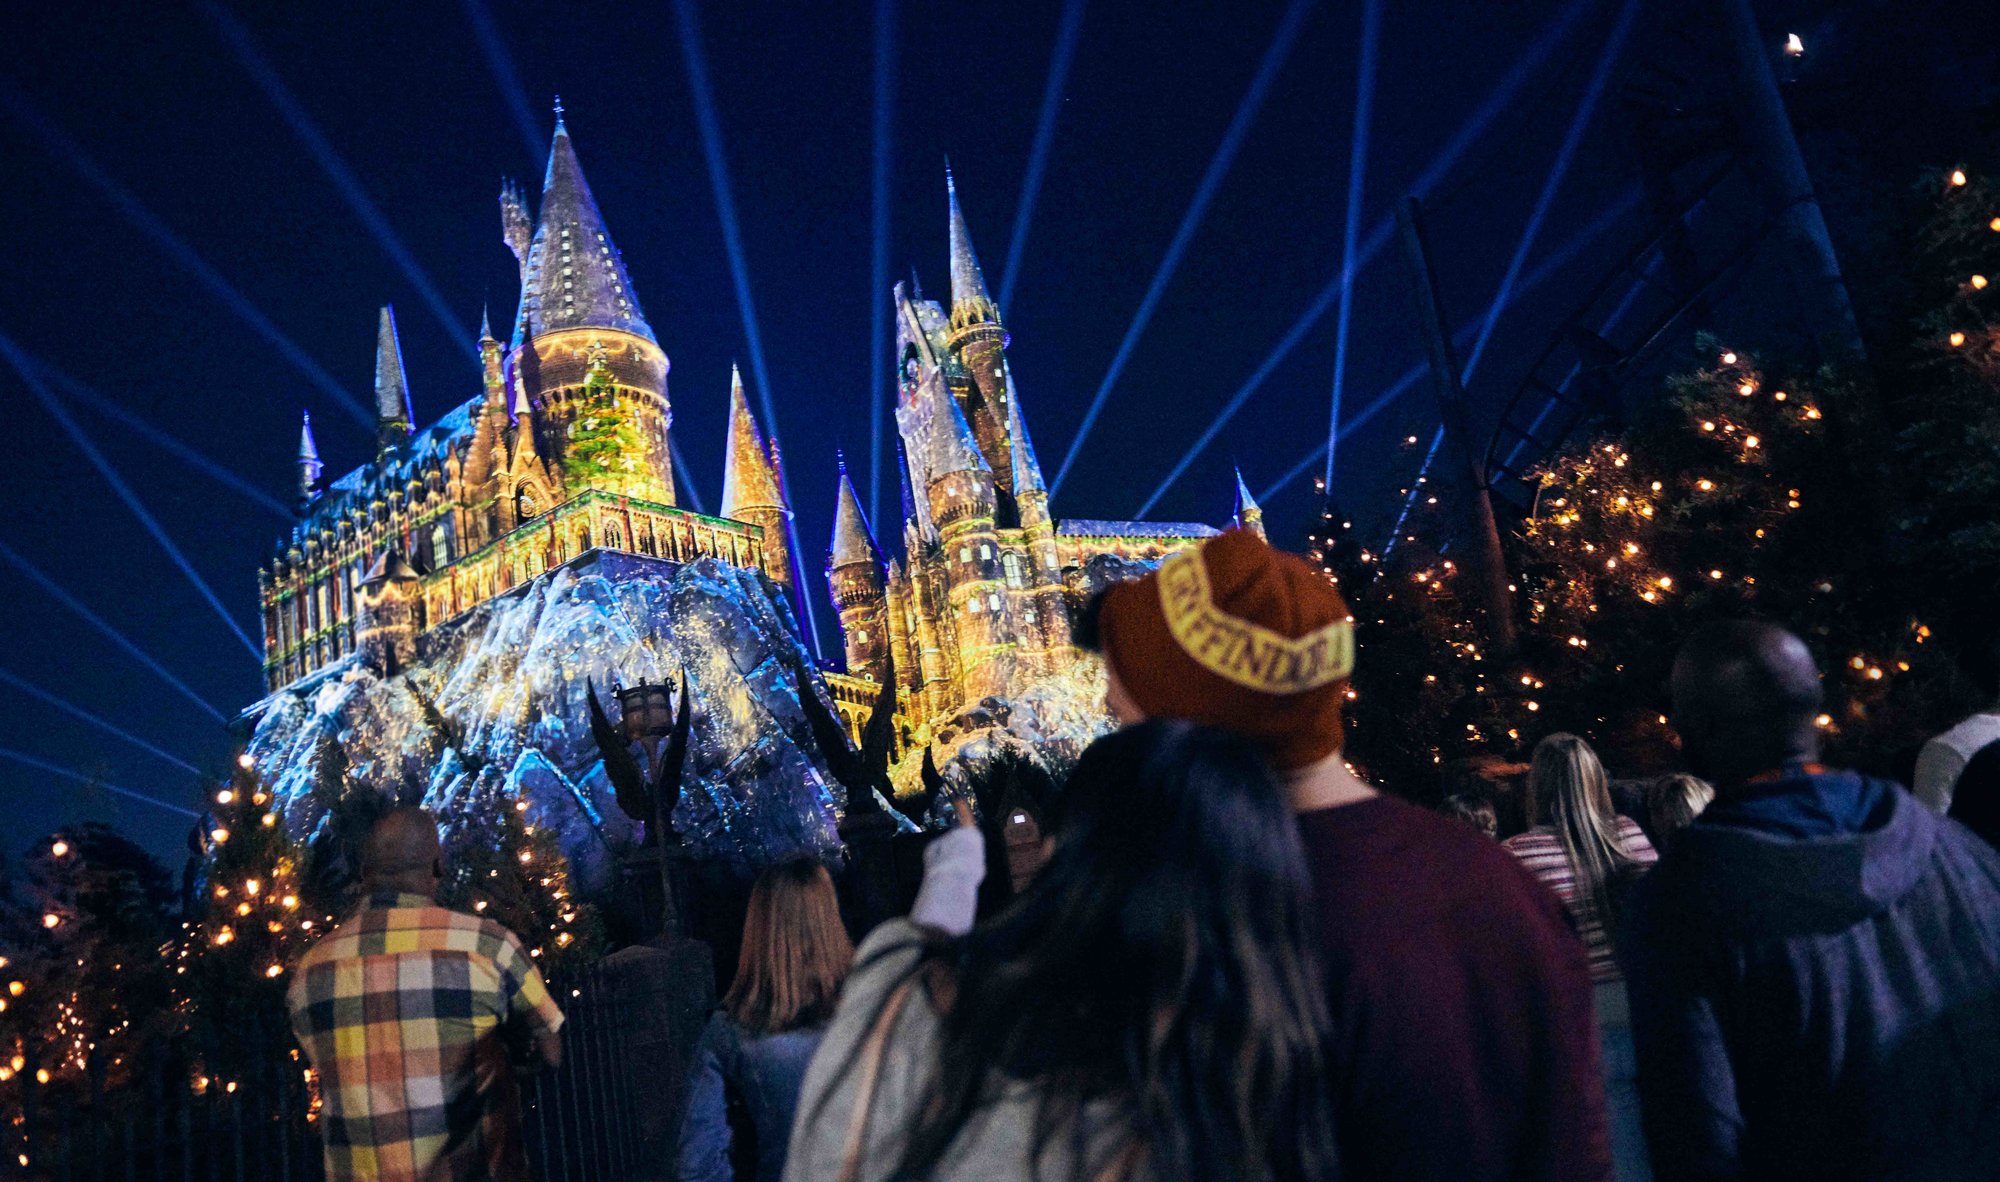 hogwarts castle with christmas projections